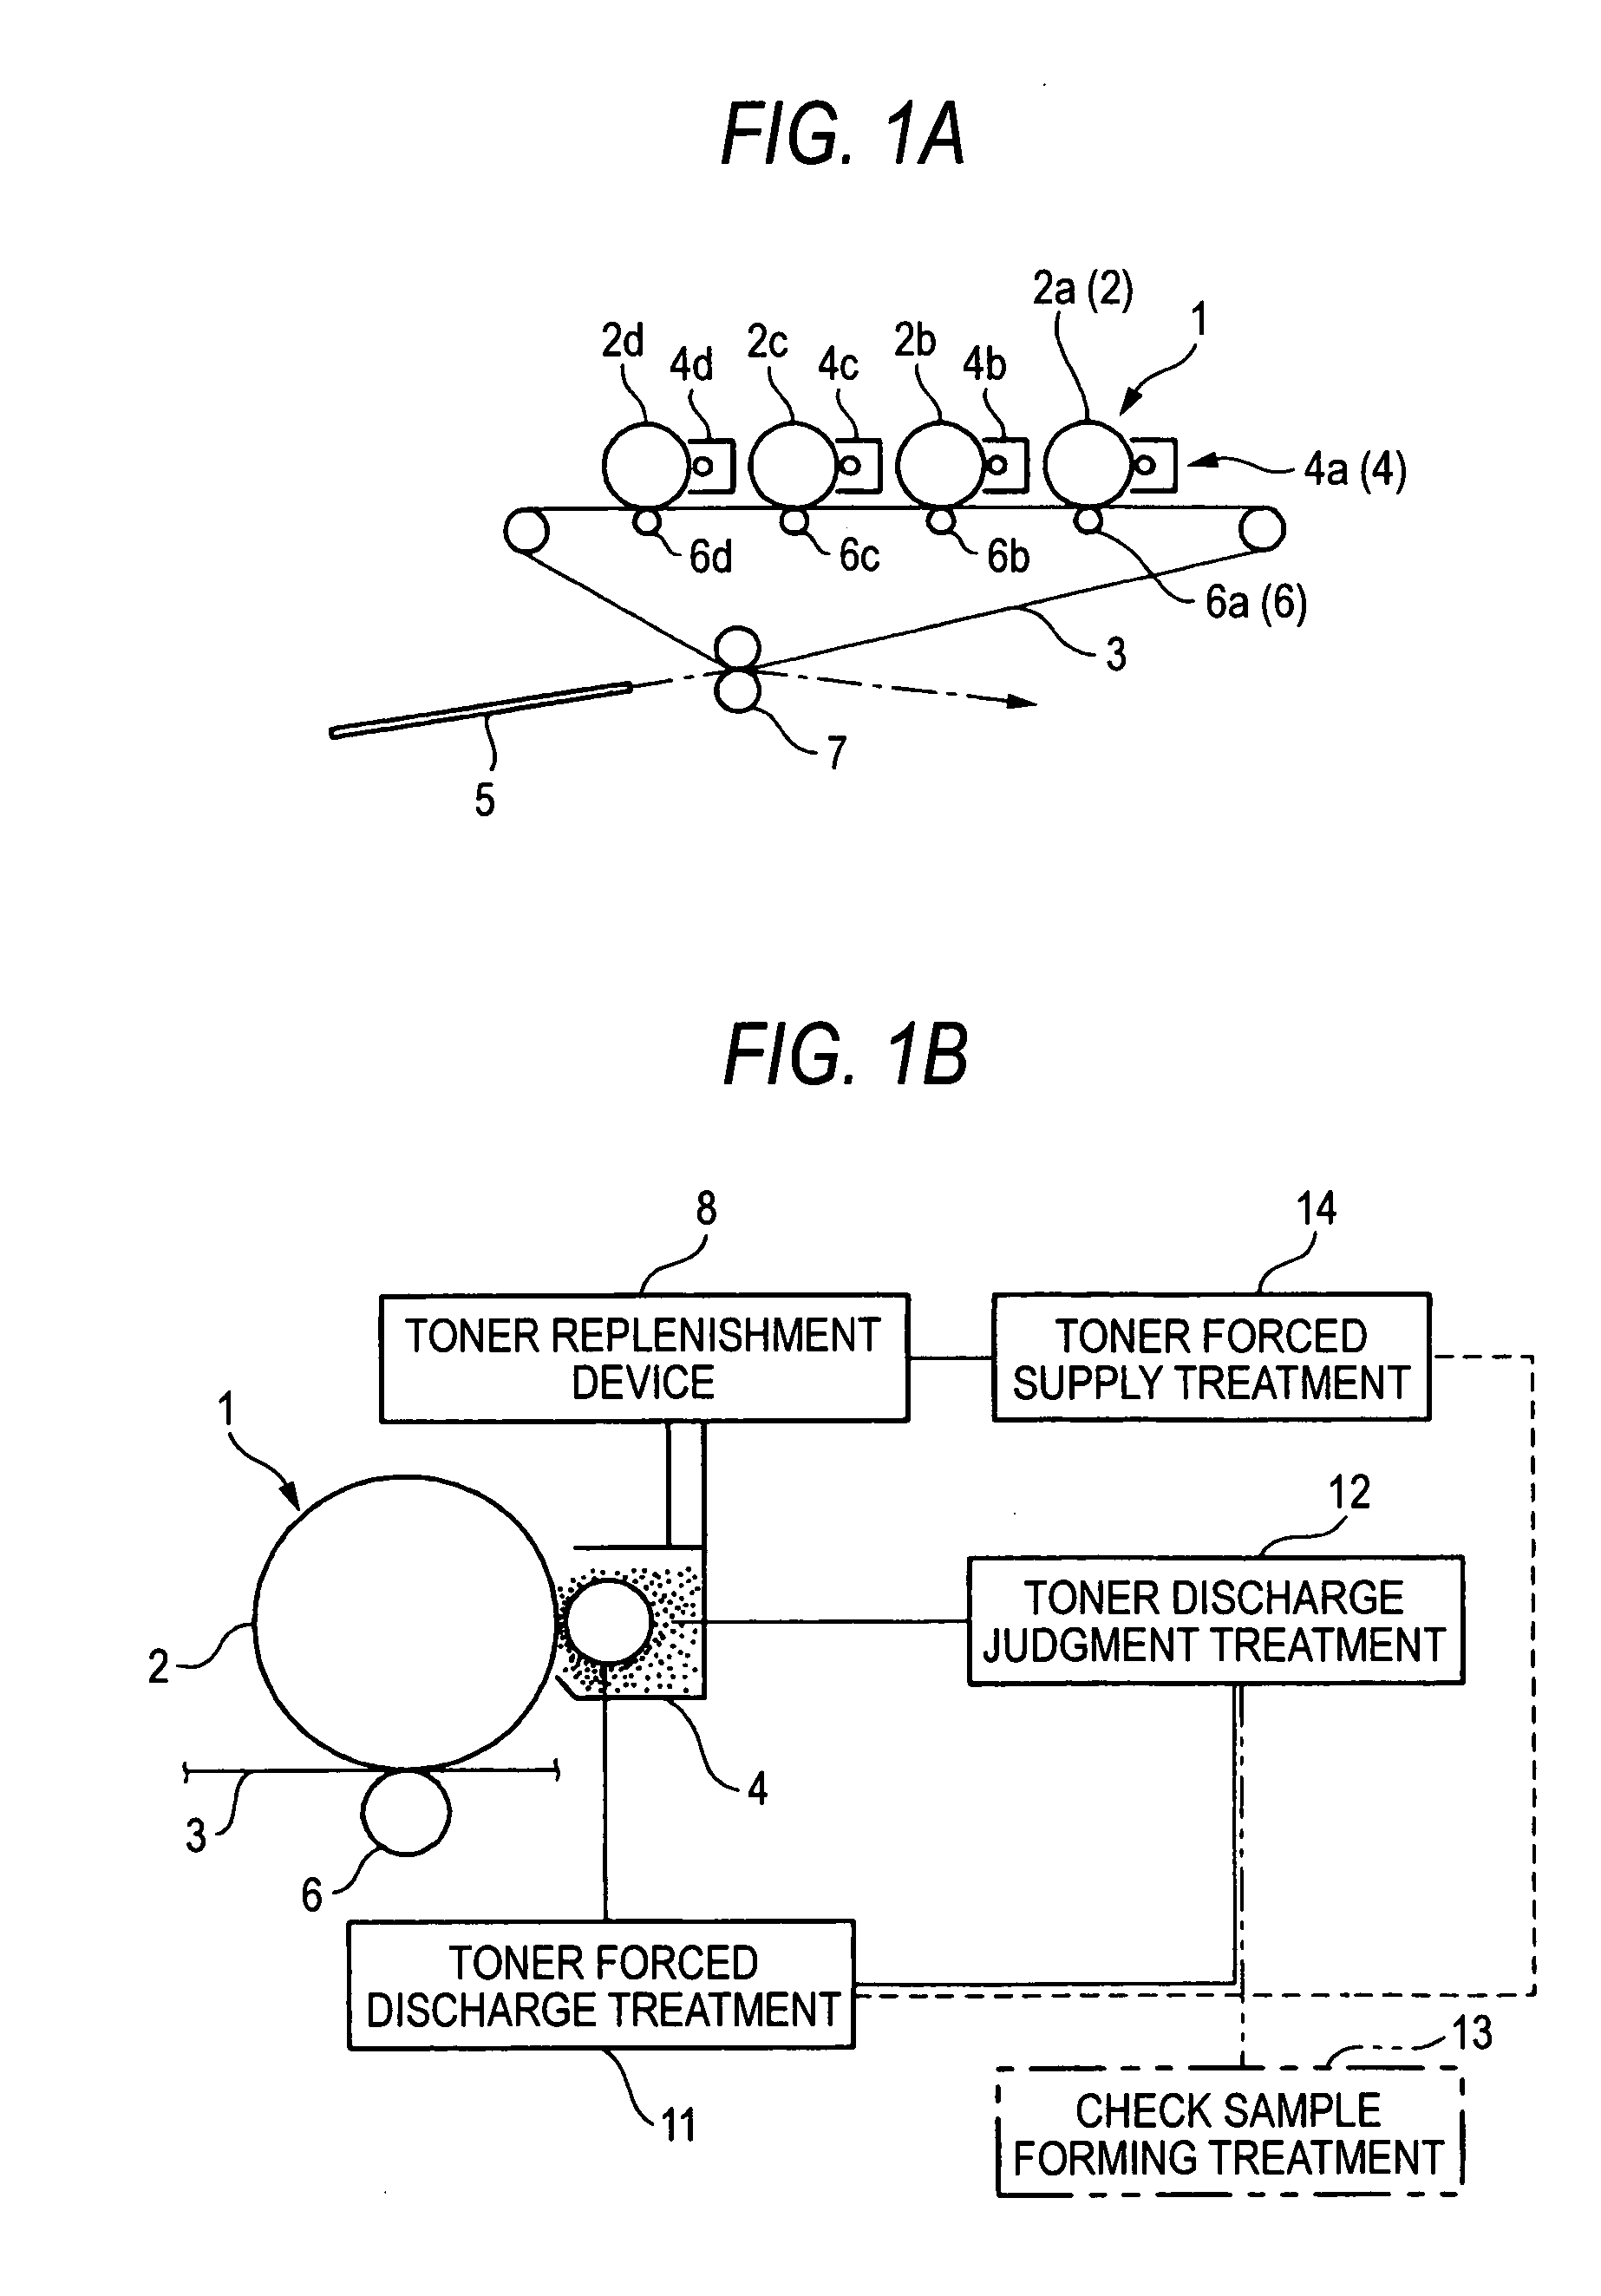 Image forming apparatus and treatment thereof